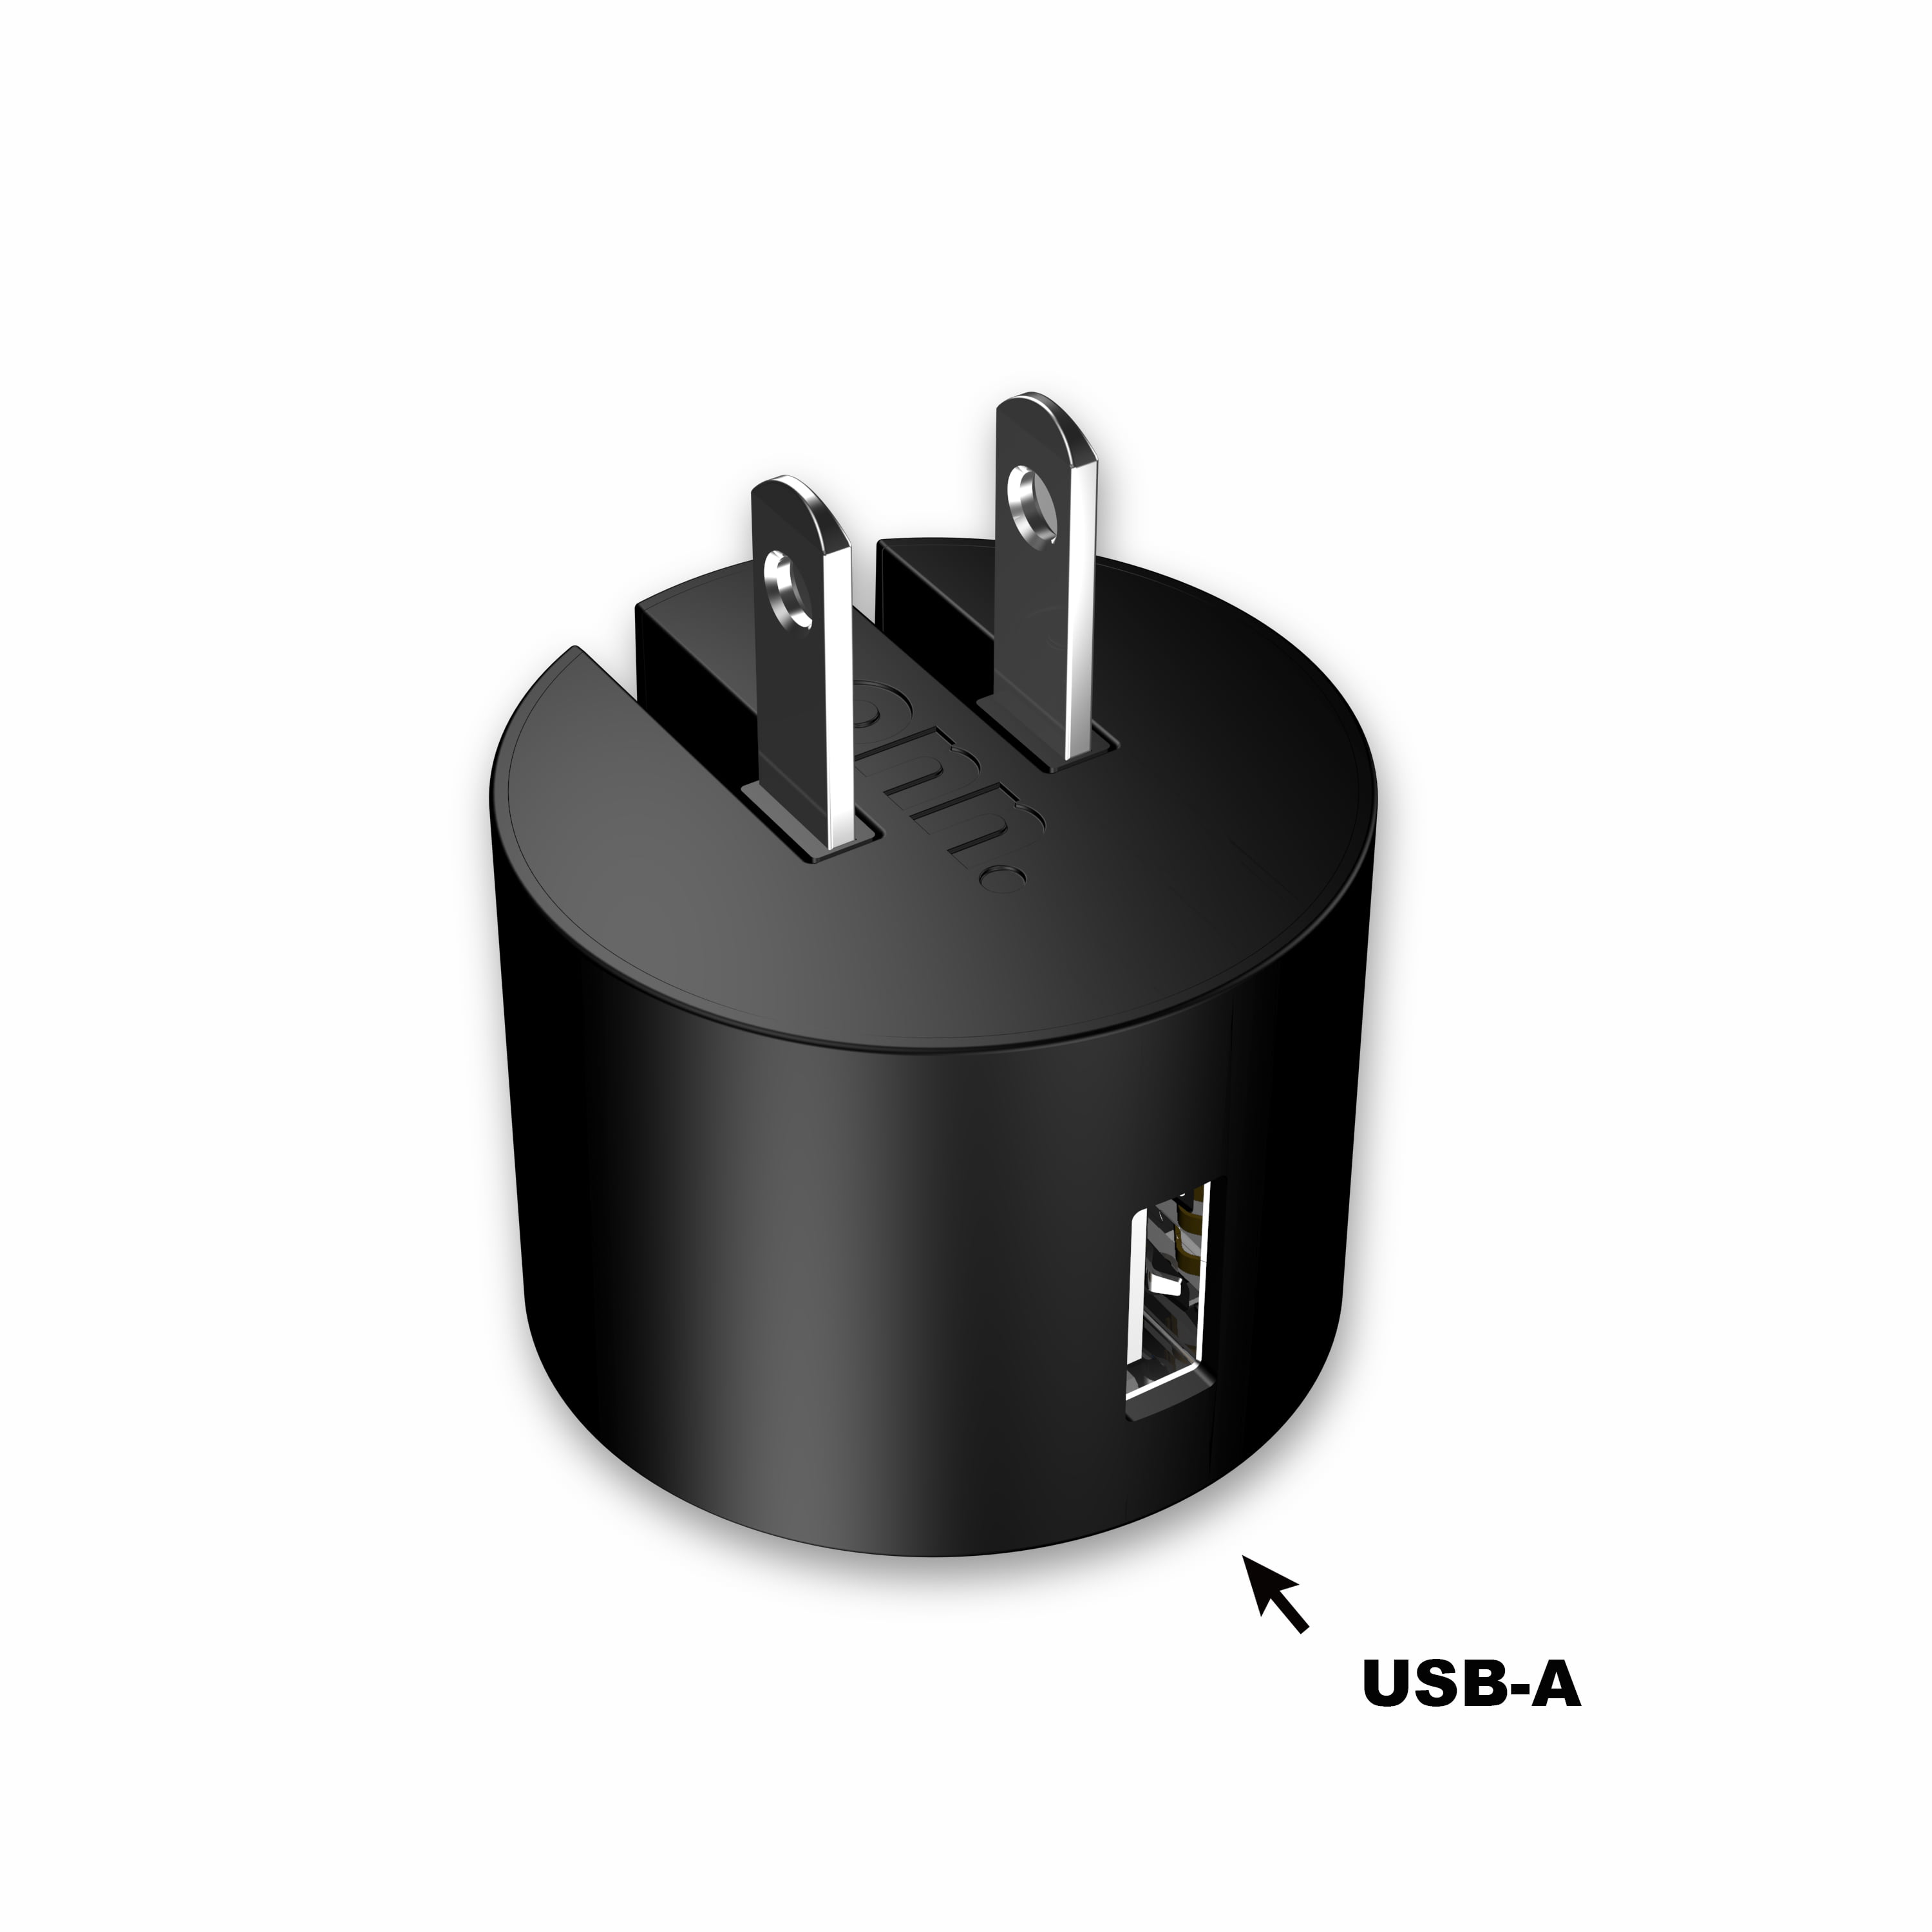 onn. 2.4A USB Wall Charger, Black, Travel friendly plug folds for easy,Simply plug your USB device into our USB Charger